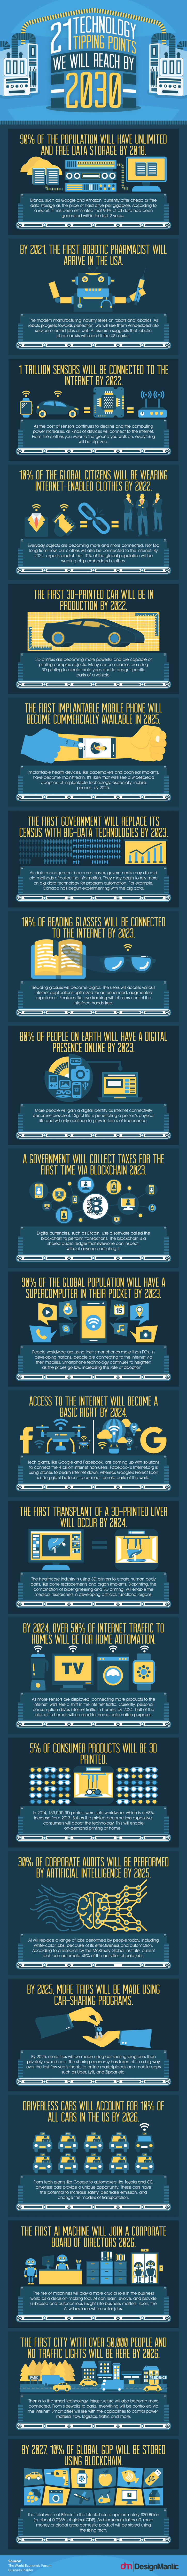 21 technology tipping points we will reach by 2030 - #infographic